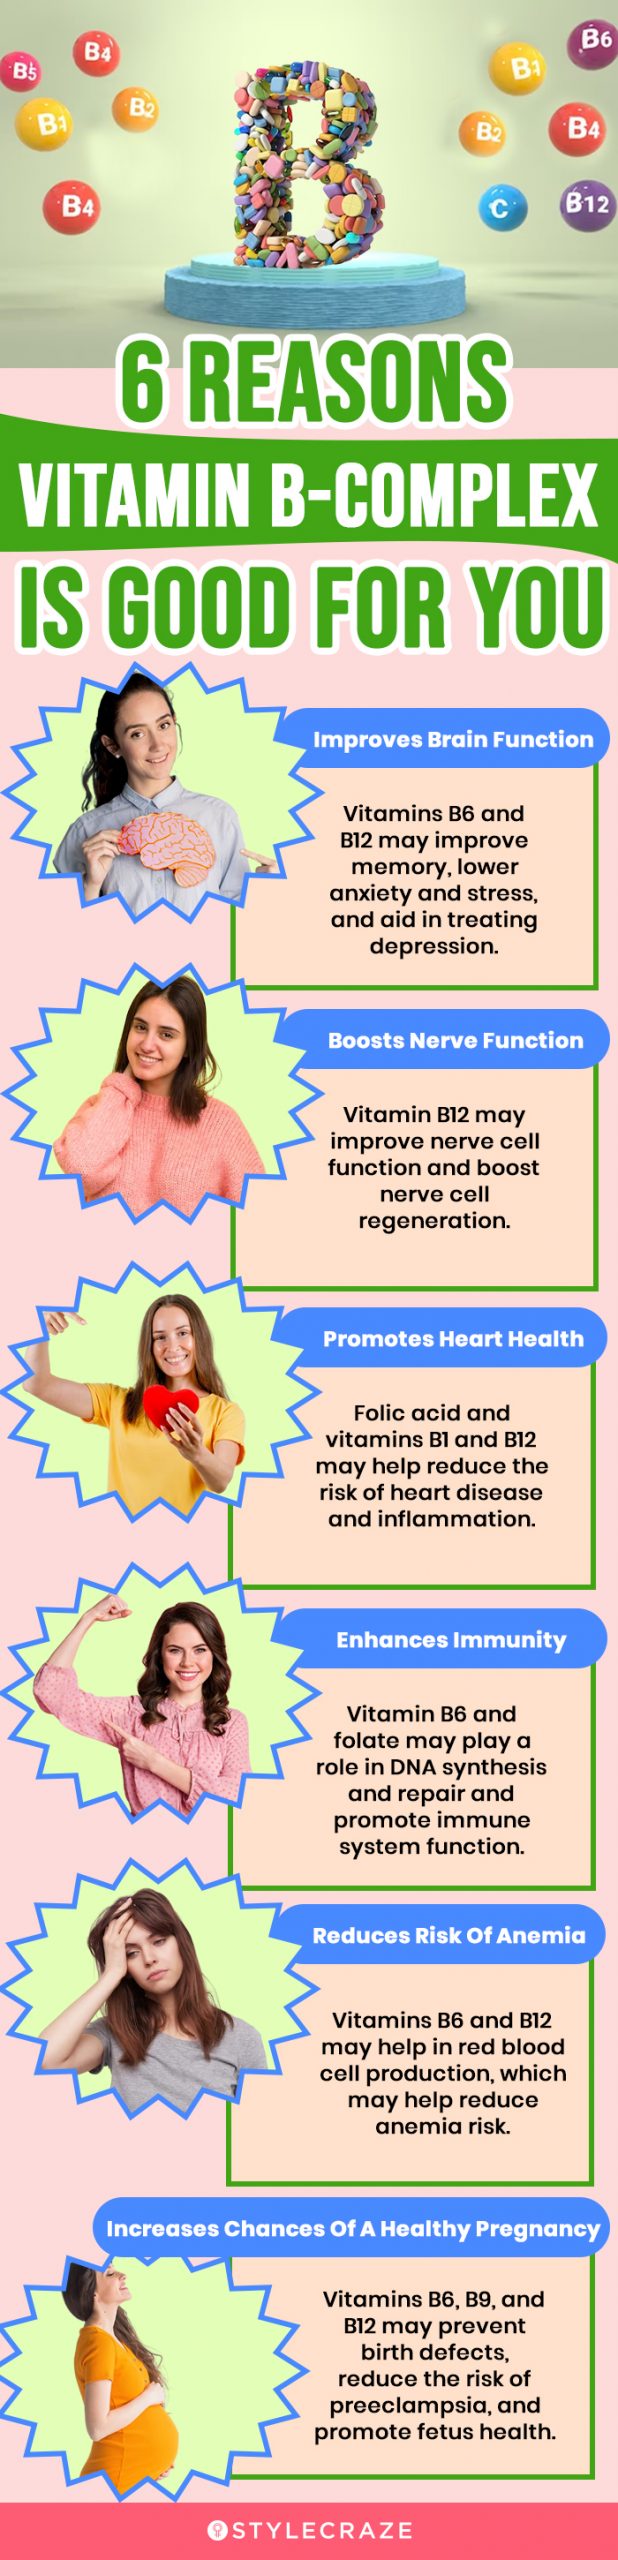 6 reasons vitamin b complex is good for you (infographic)